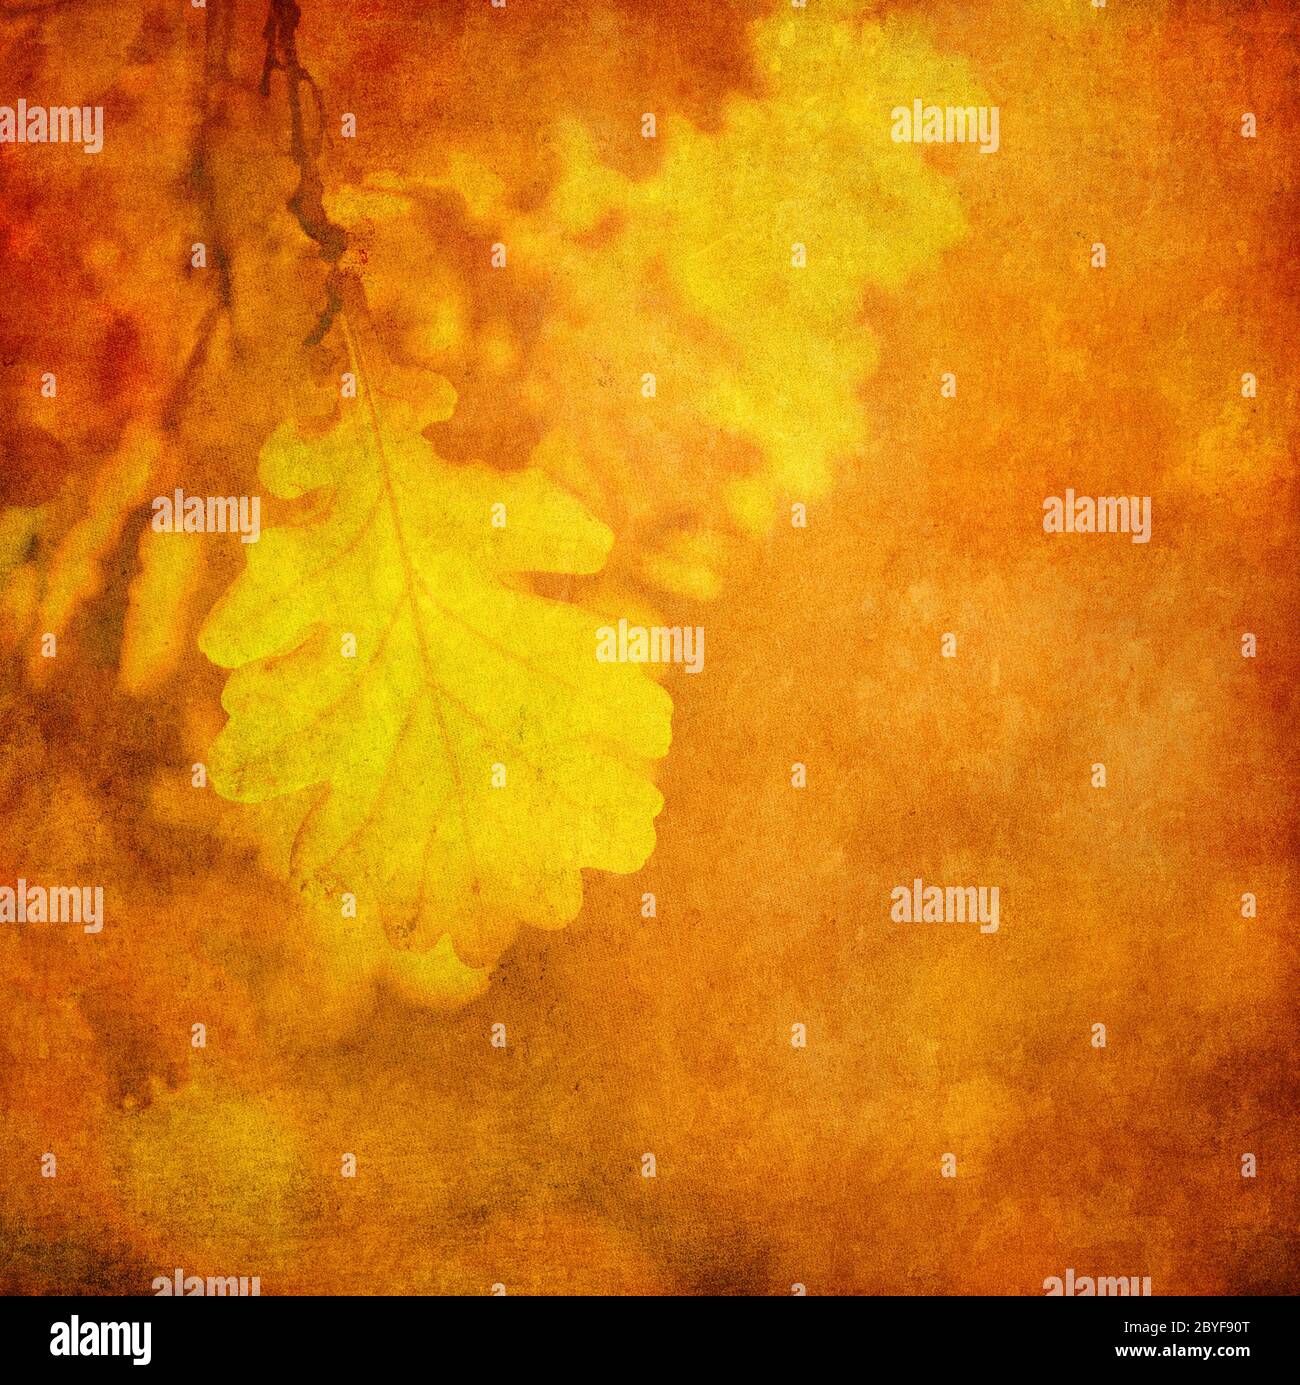 Grunge background with autumn leaves Stock Photo